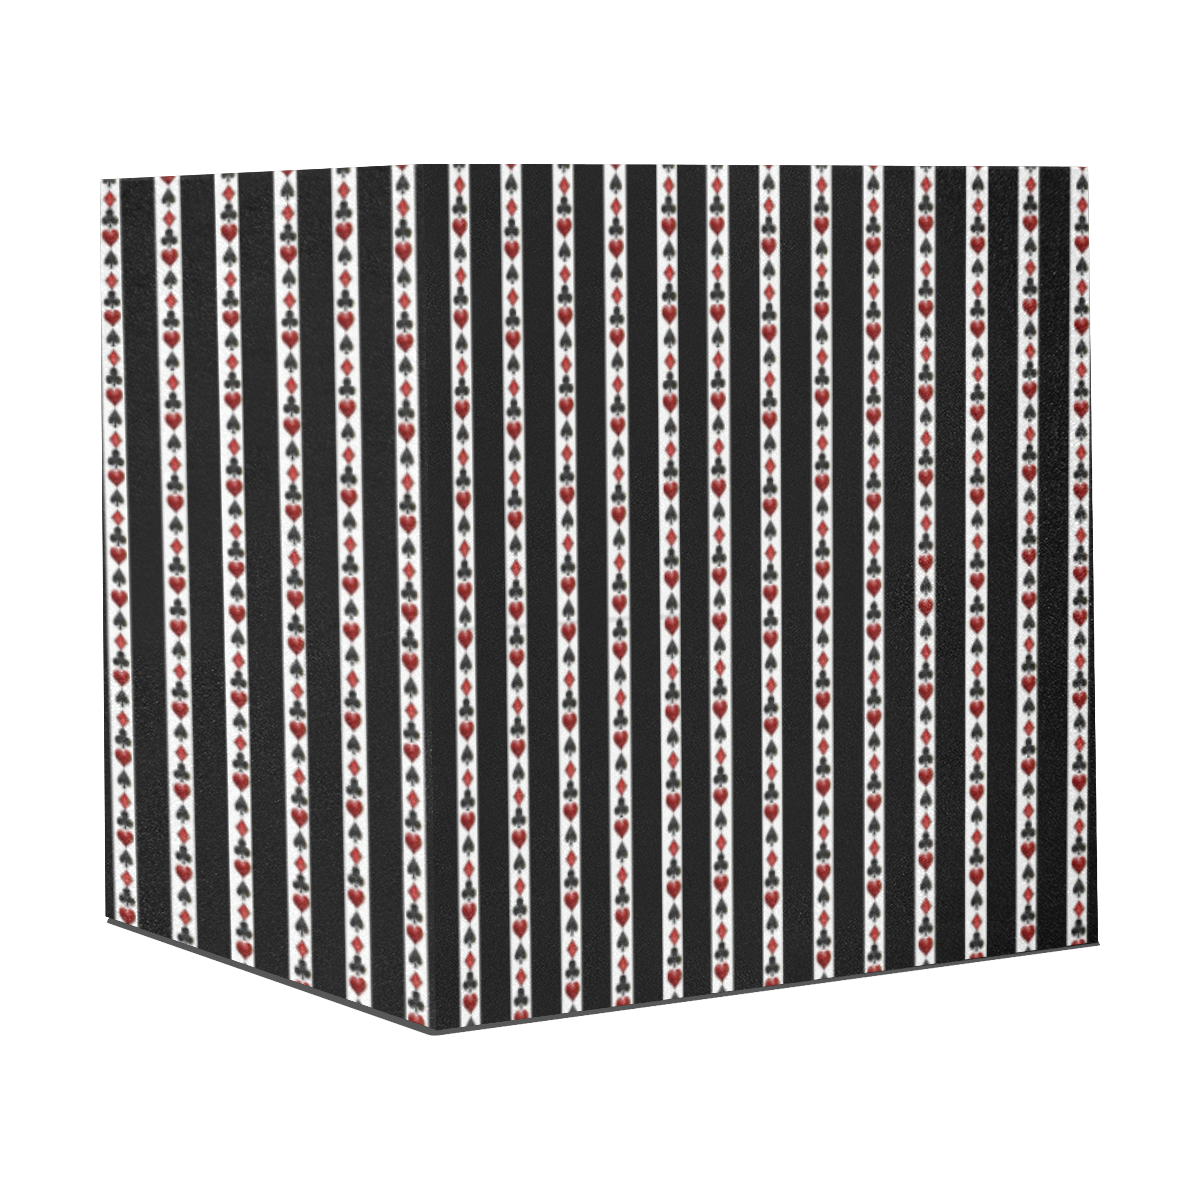 Las Vegas Playing Card Symbols Stripes Gift Wrapping Paper 58"x 23" (3 Rolls)